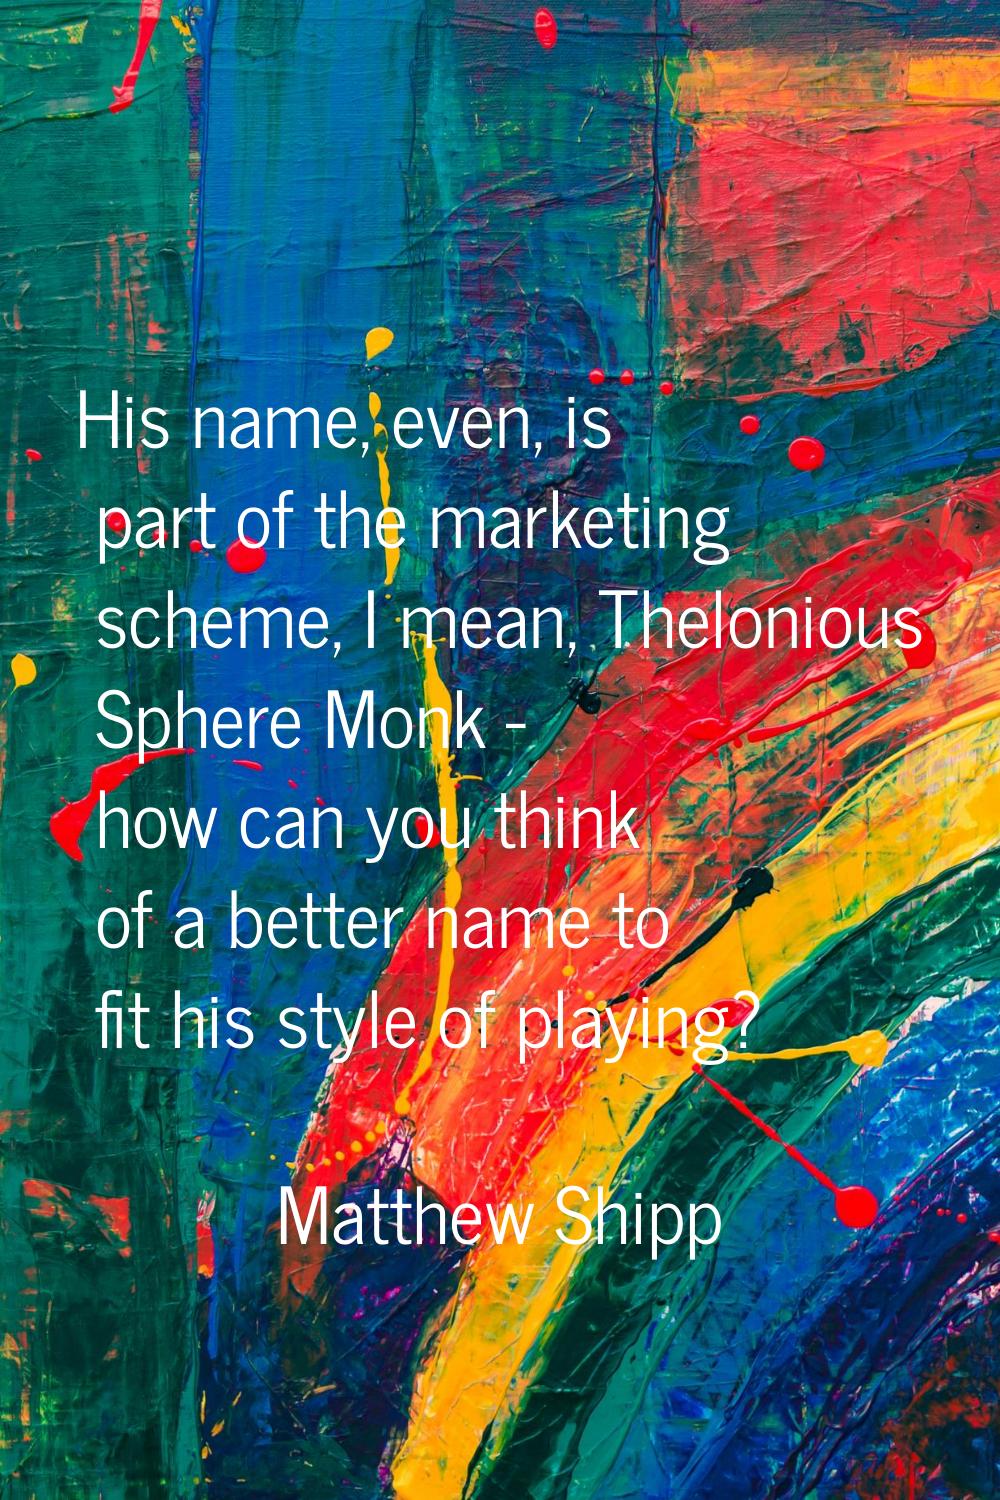 His name, even, is part of the marketing scheme, I mean, Thelonious Sphere Monk - how can you think